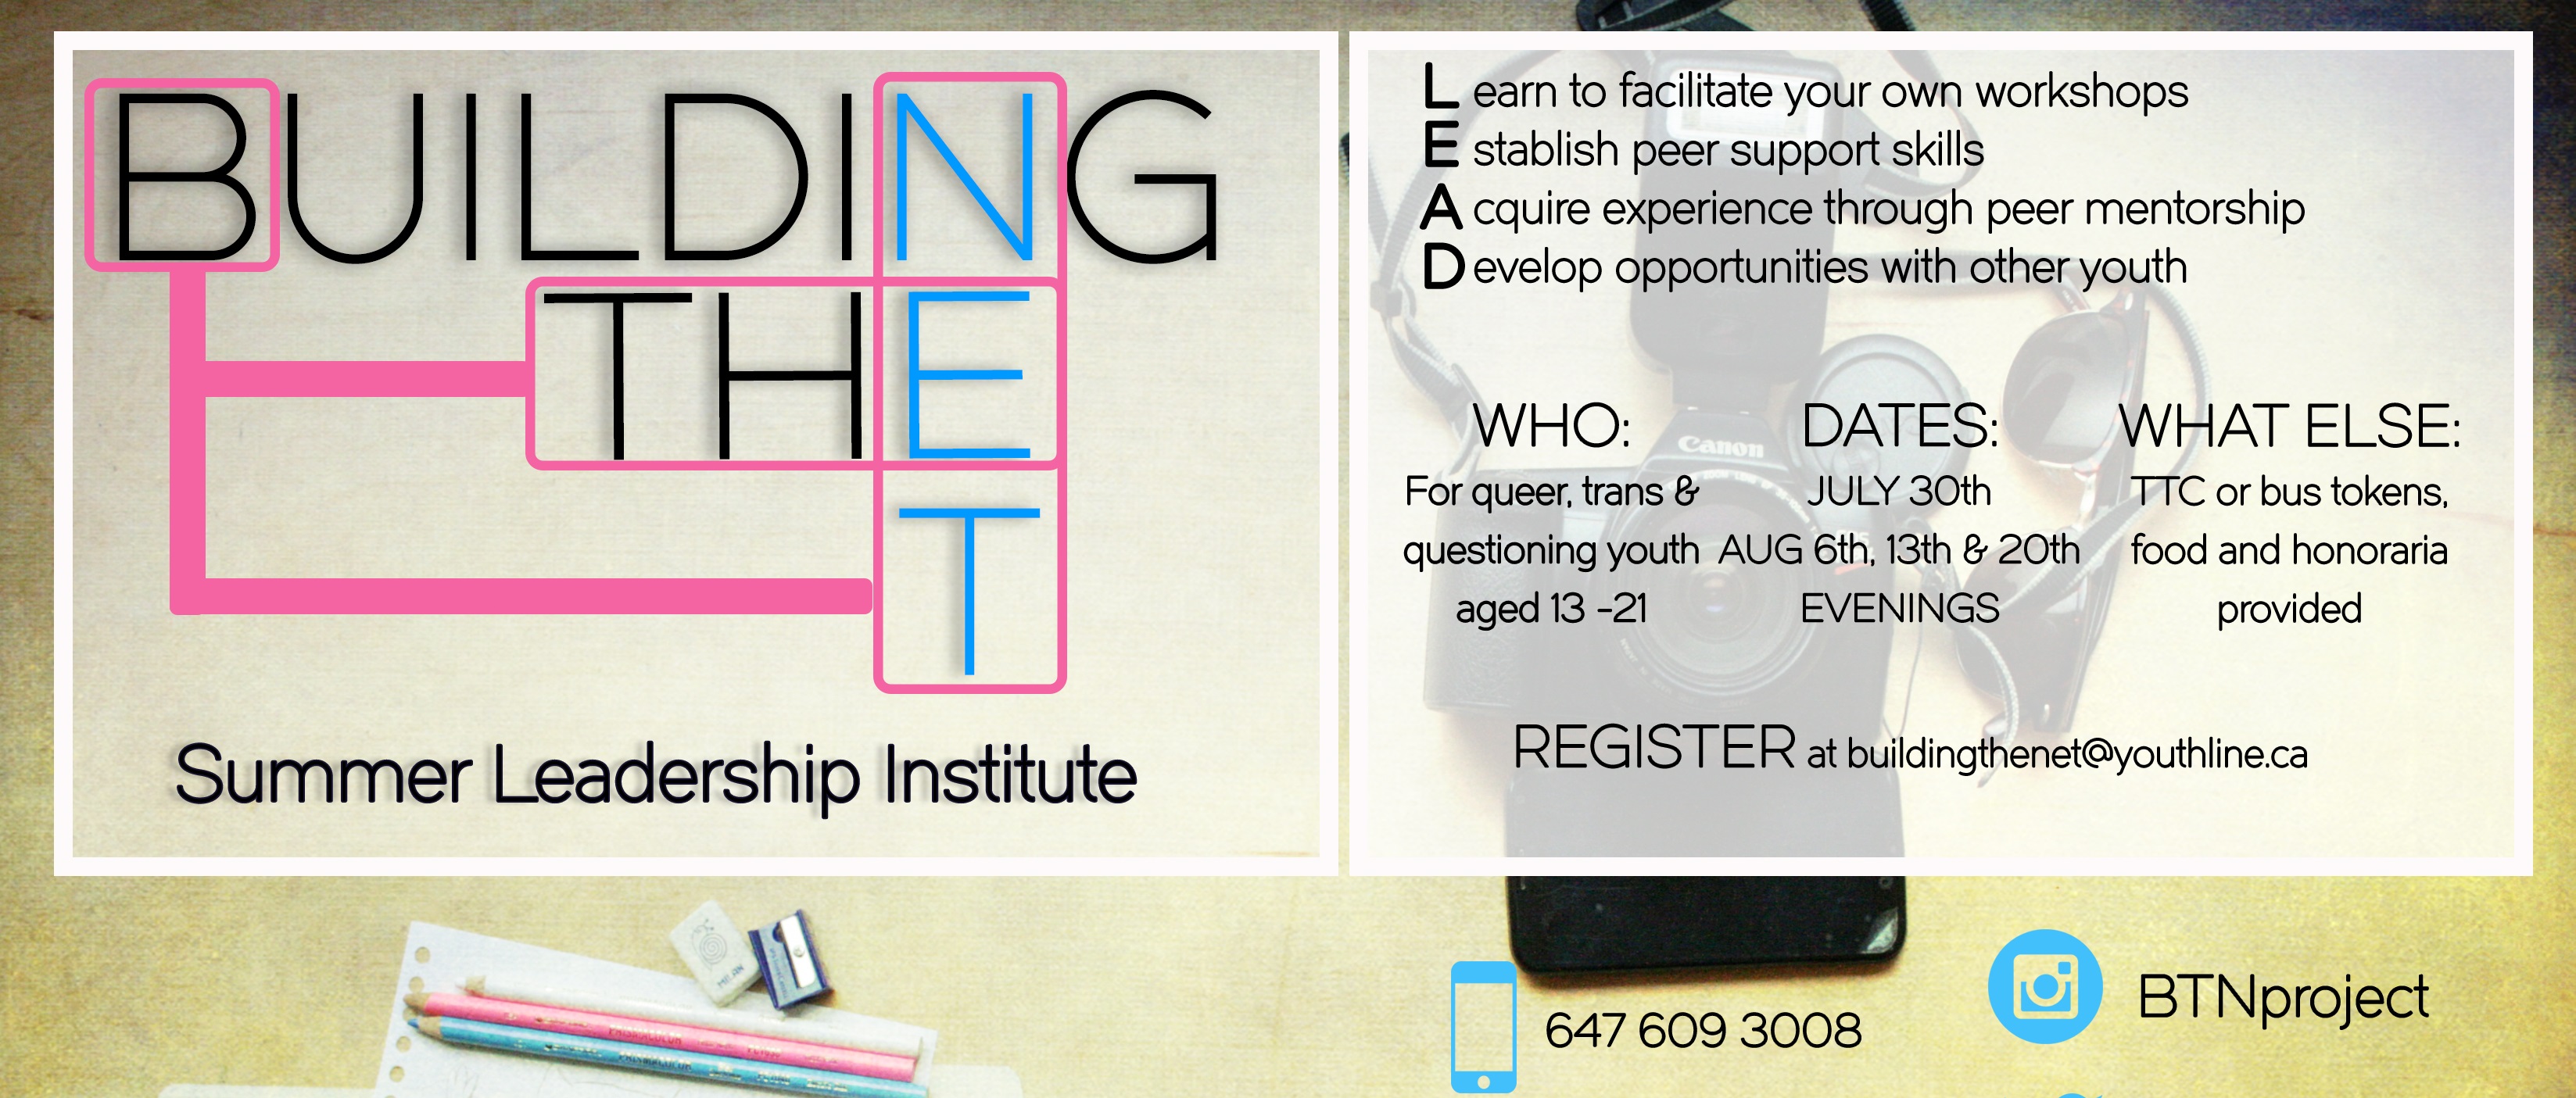 The Summer Leadership Institute is starting soon! LGBT YouthLine